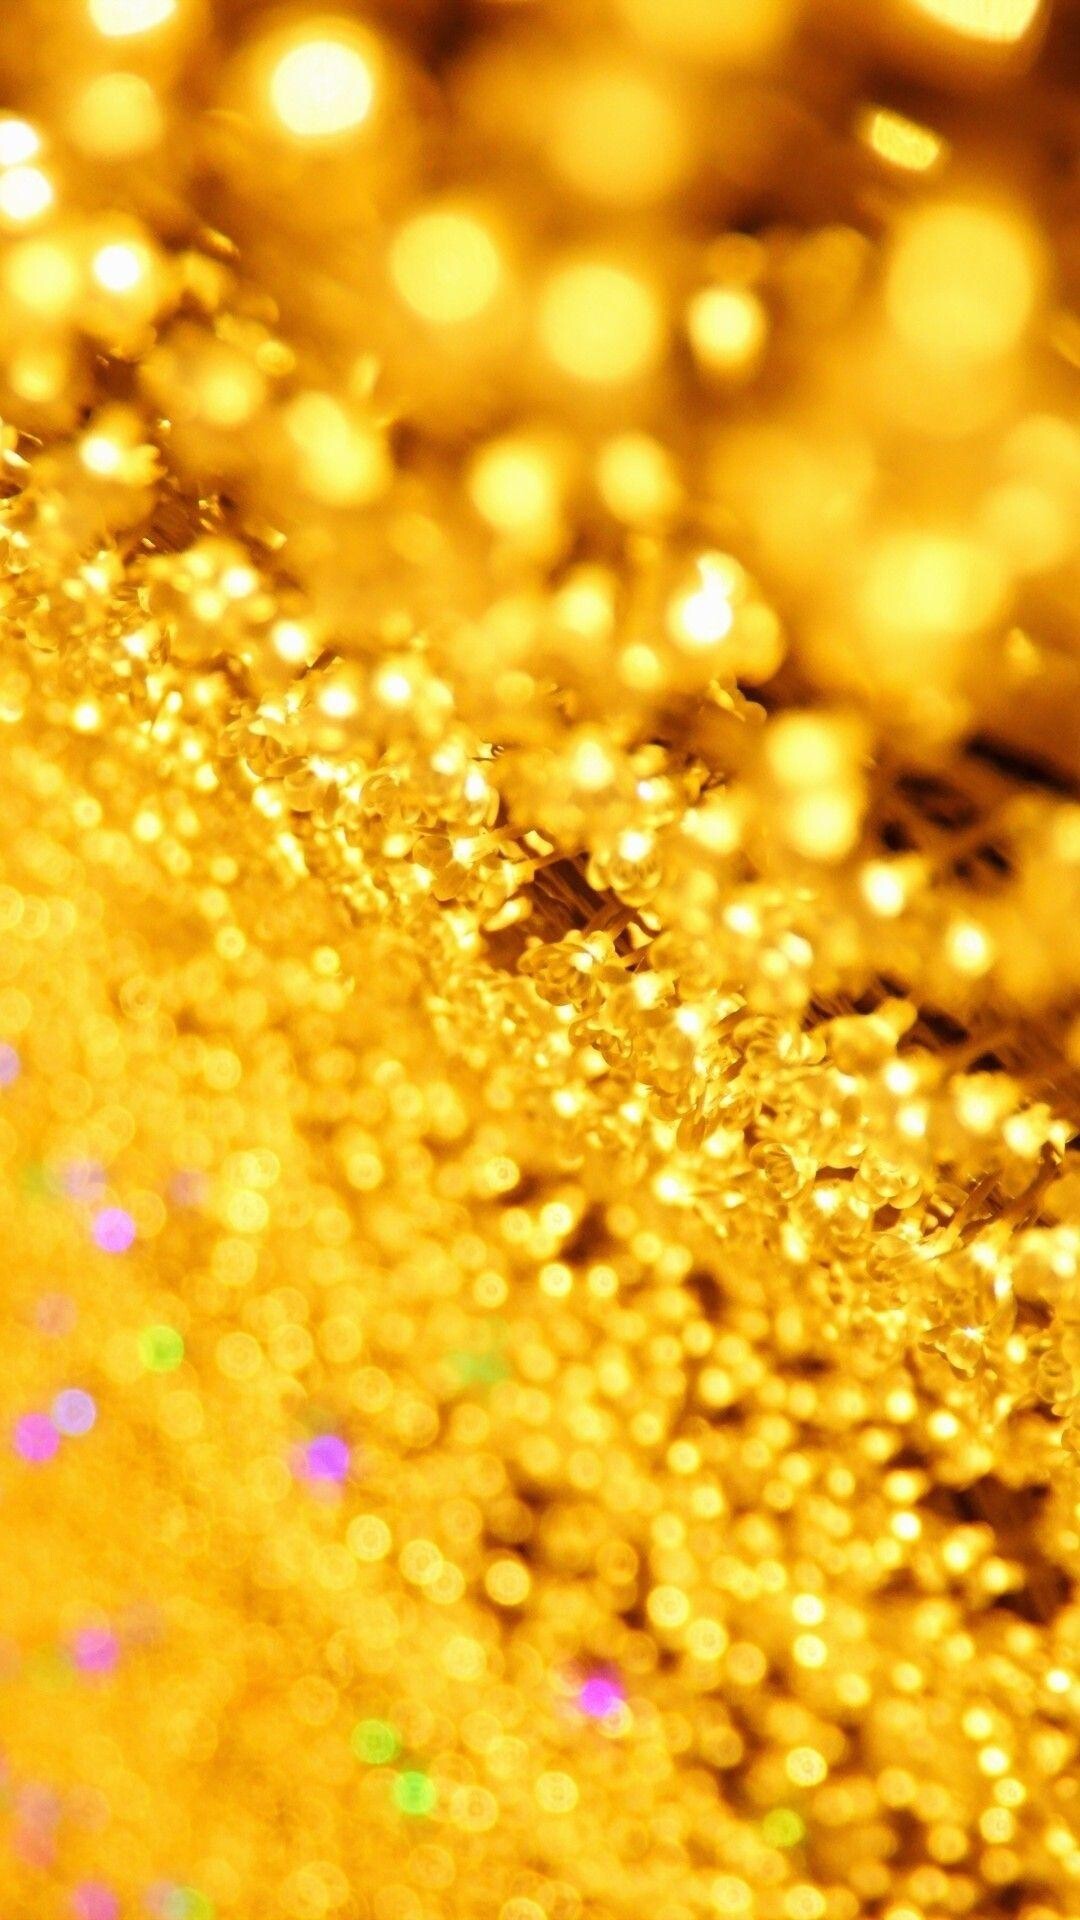 Gold Glitter: The layer of the thin gold sheet that is covered with shiny particles. 1080x1920 Full HD Wallpaper.